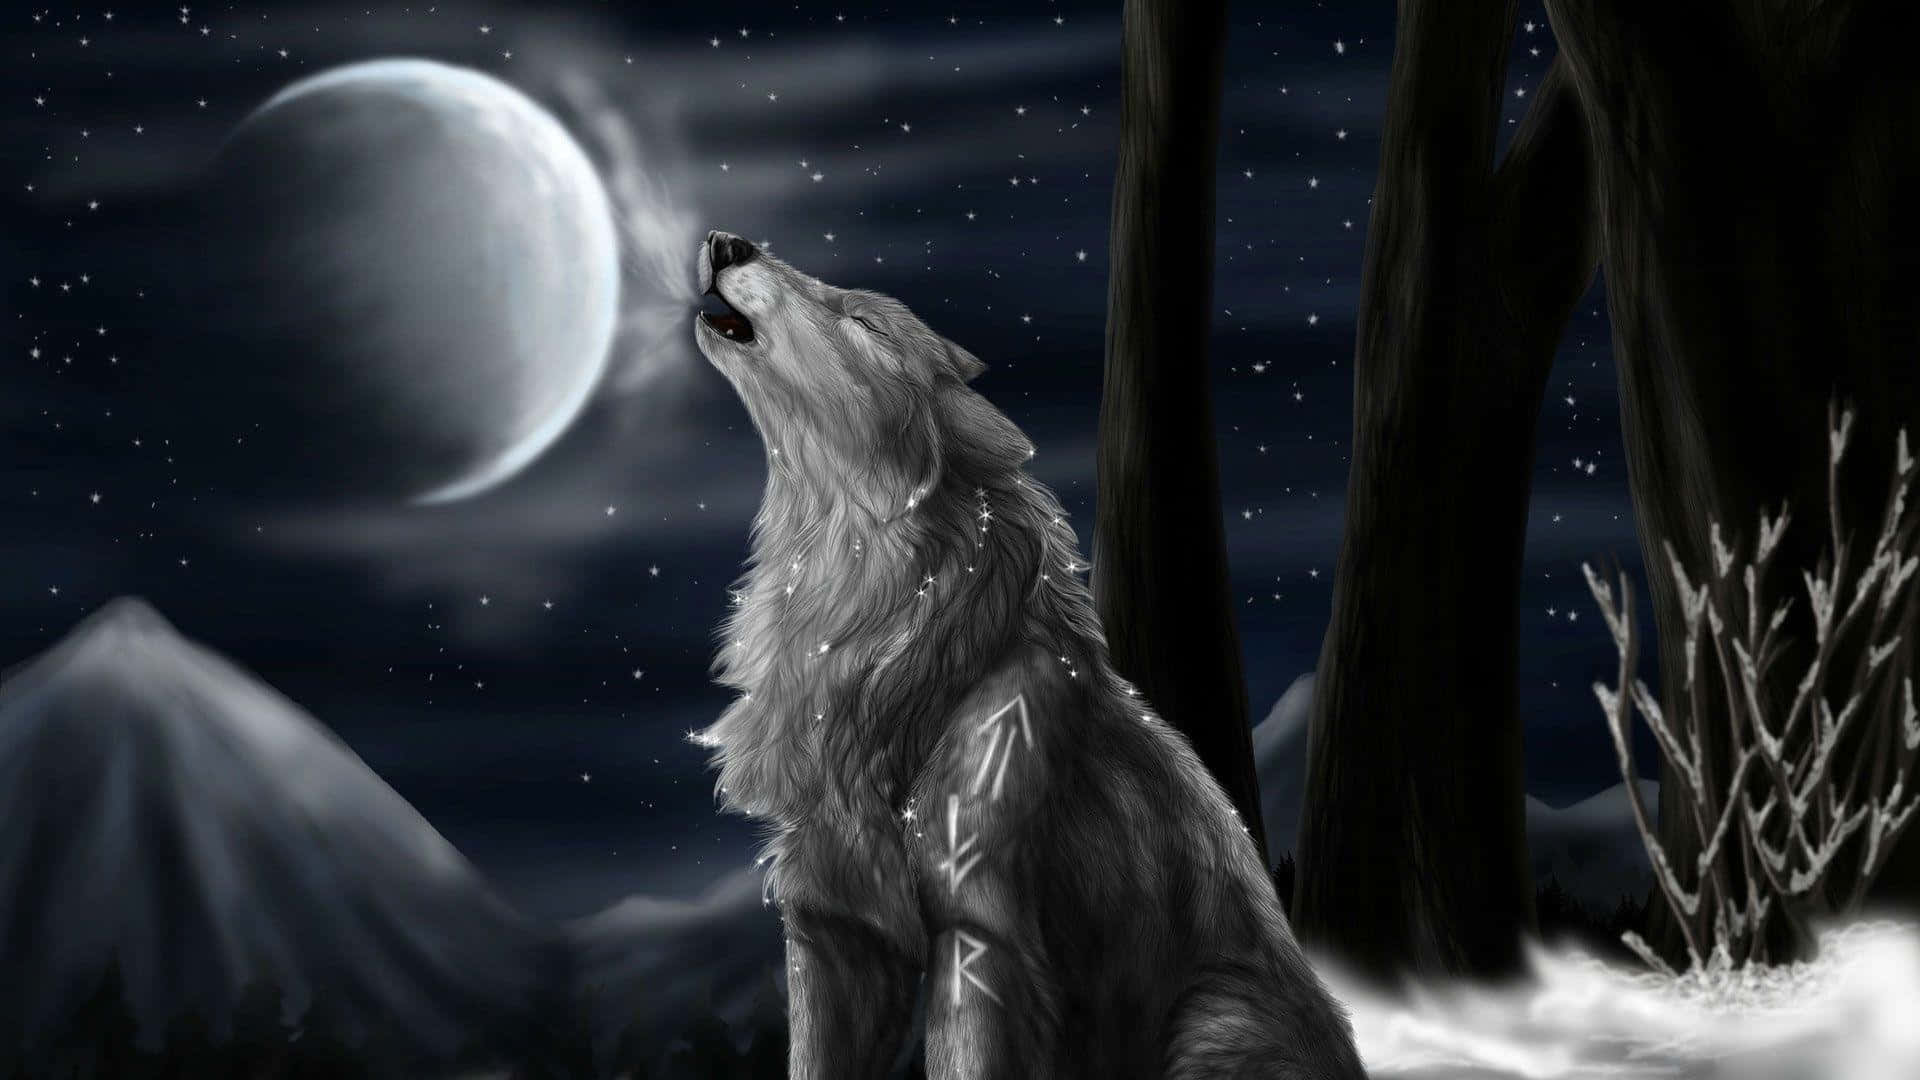 A howling wolf pauses to reflect under a beautiful night sky